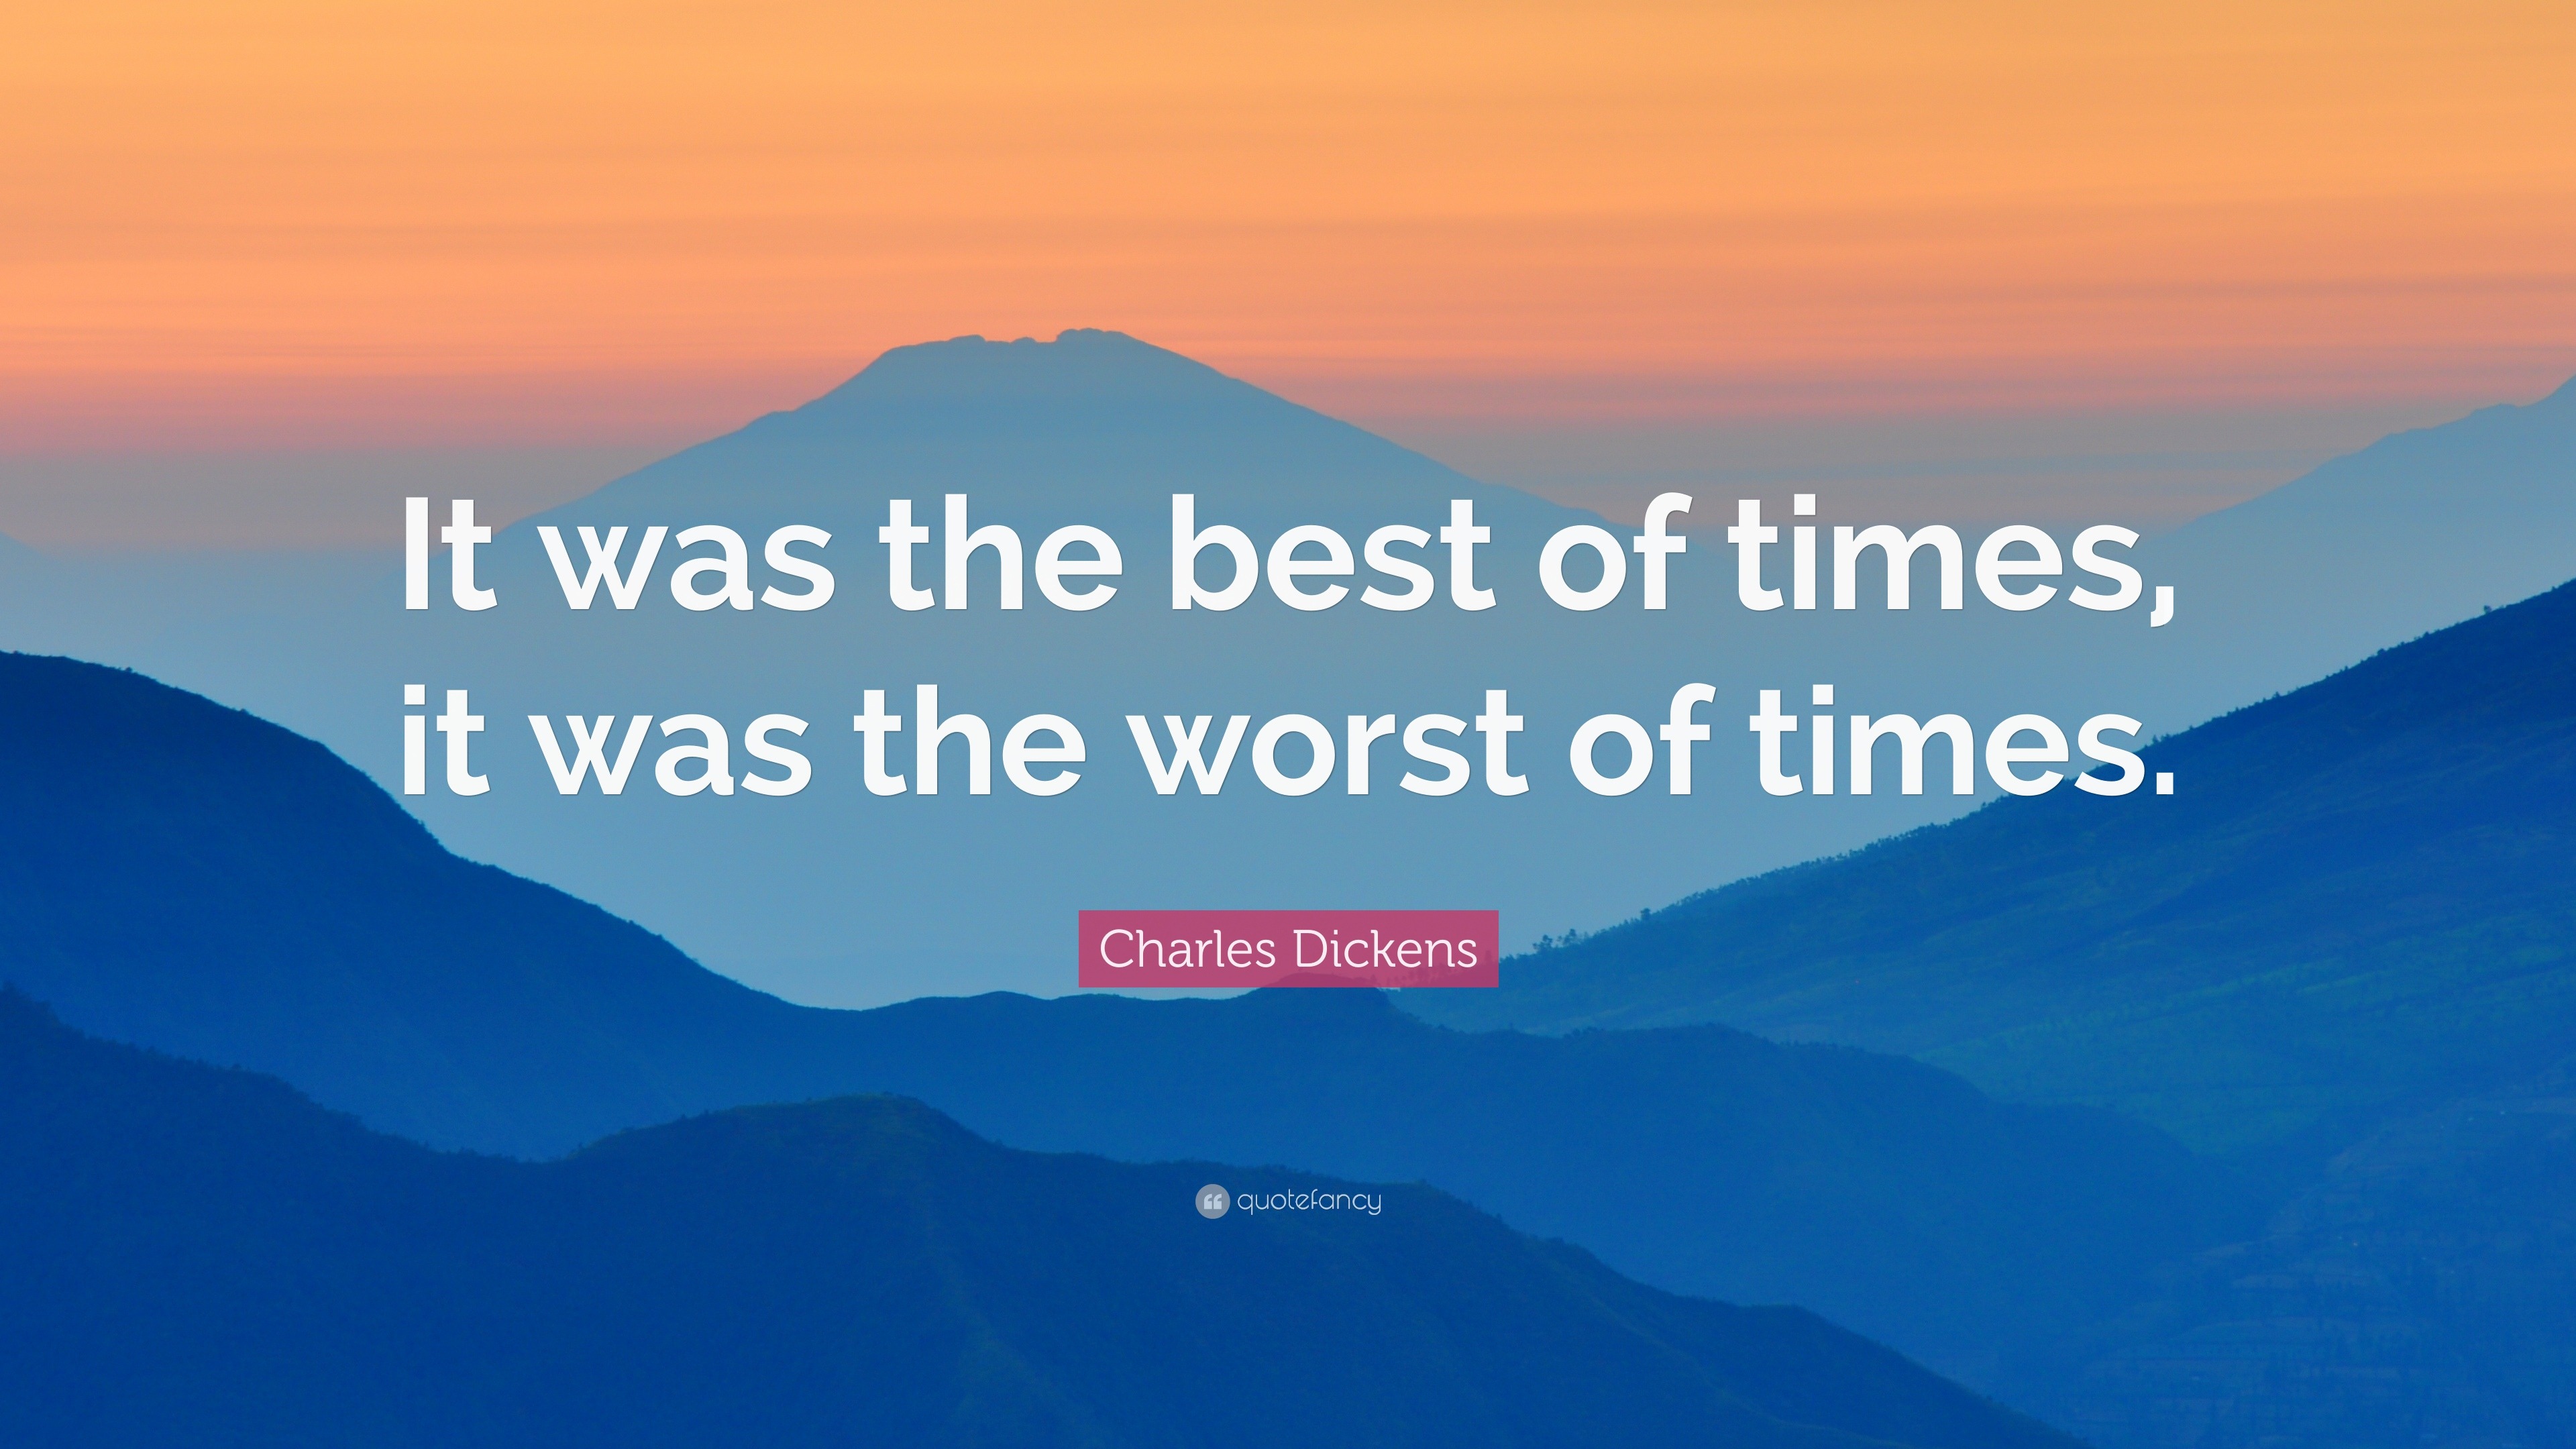 Charles Dickens Quote: “It was the best of times, it was the worst of times .”